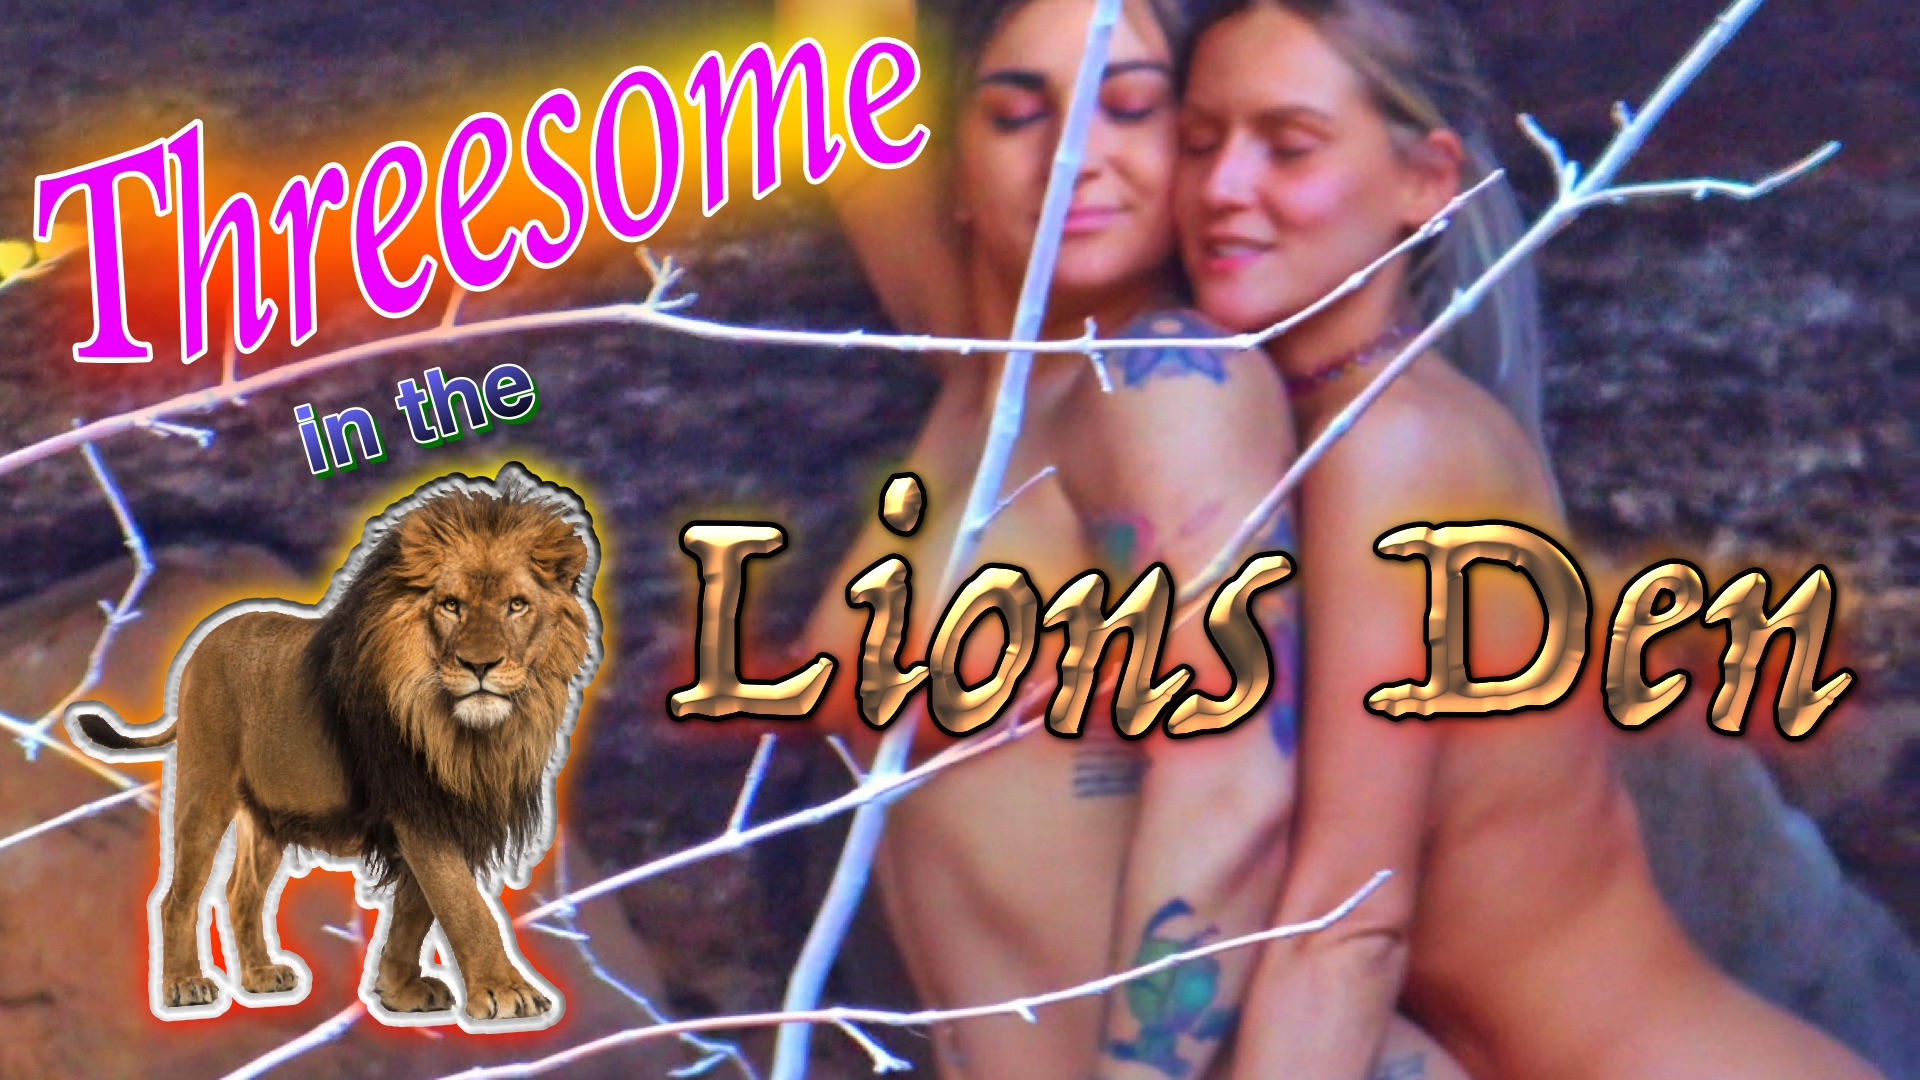 Threesome in the Lions Den